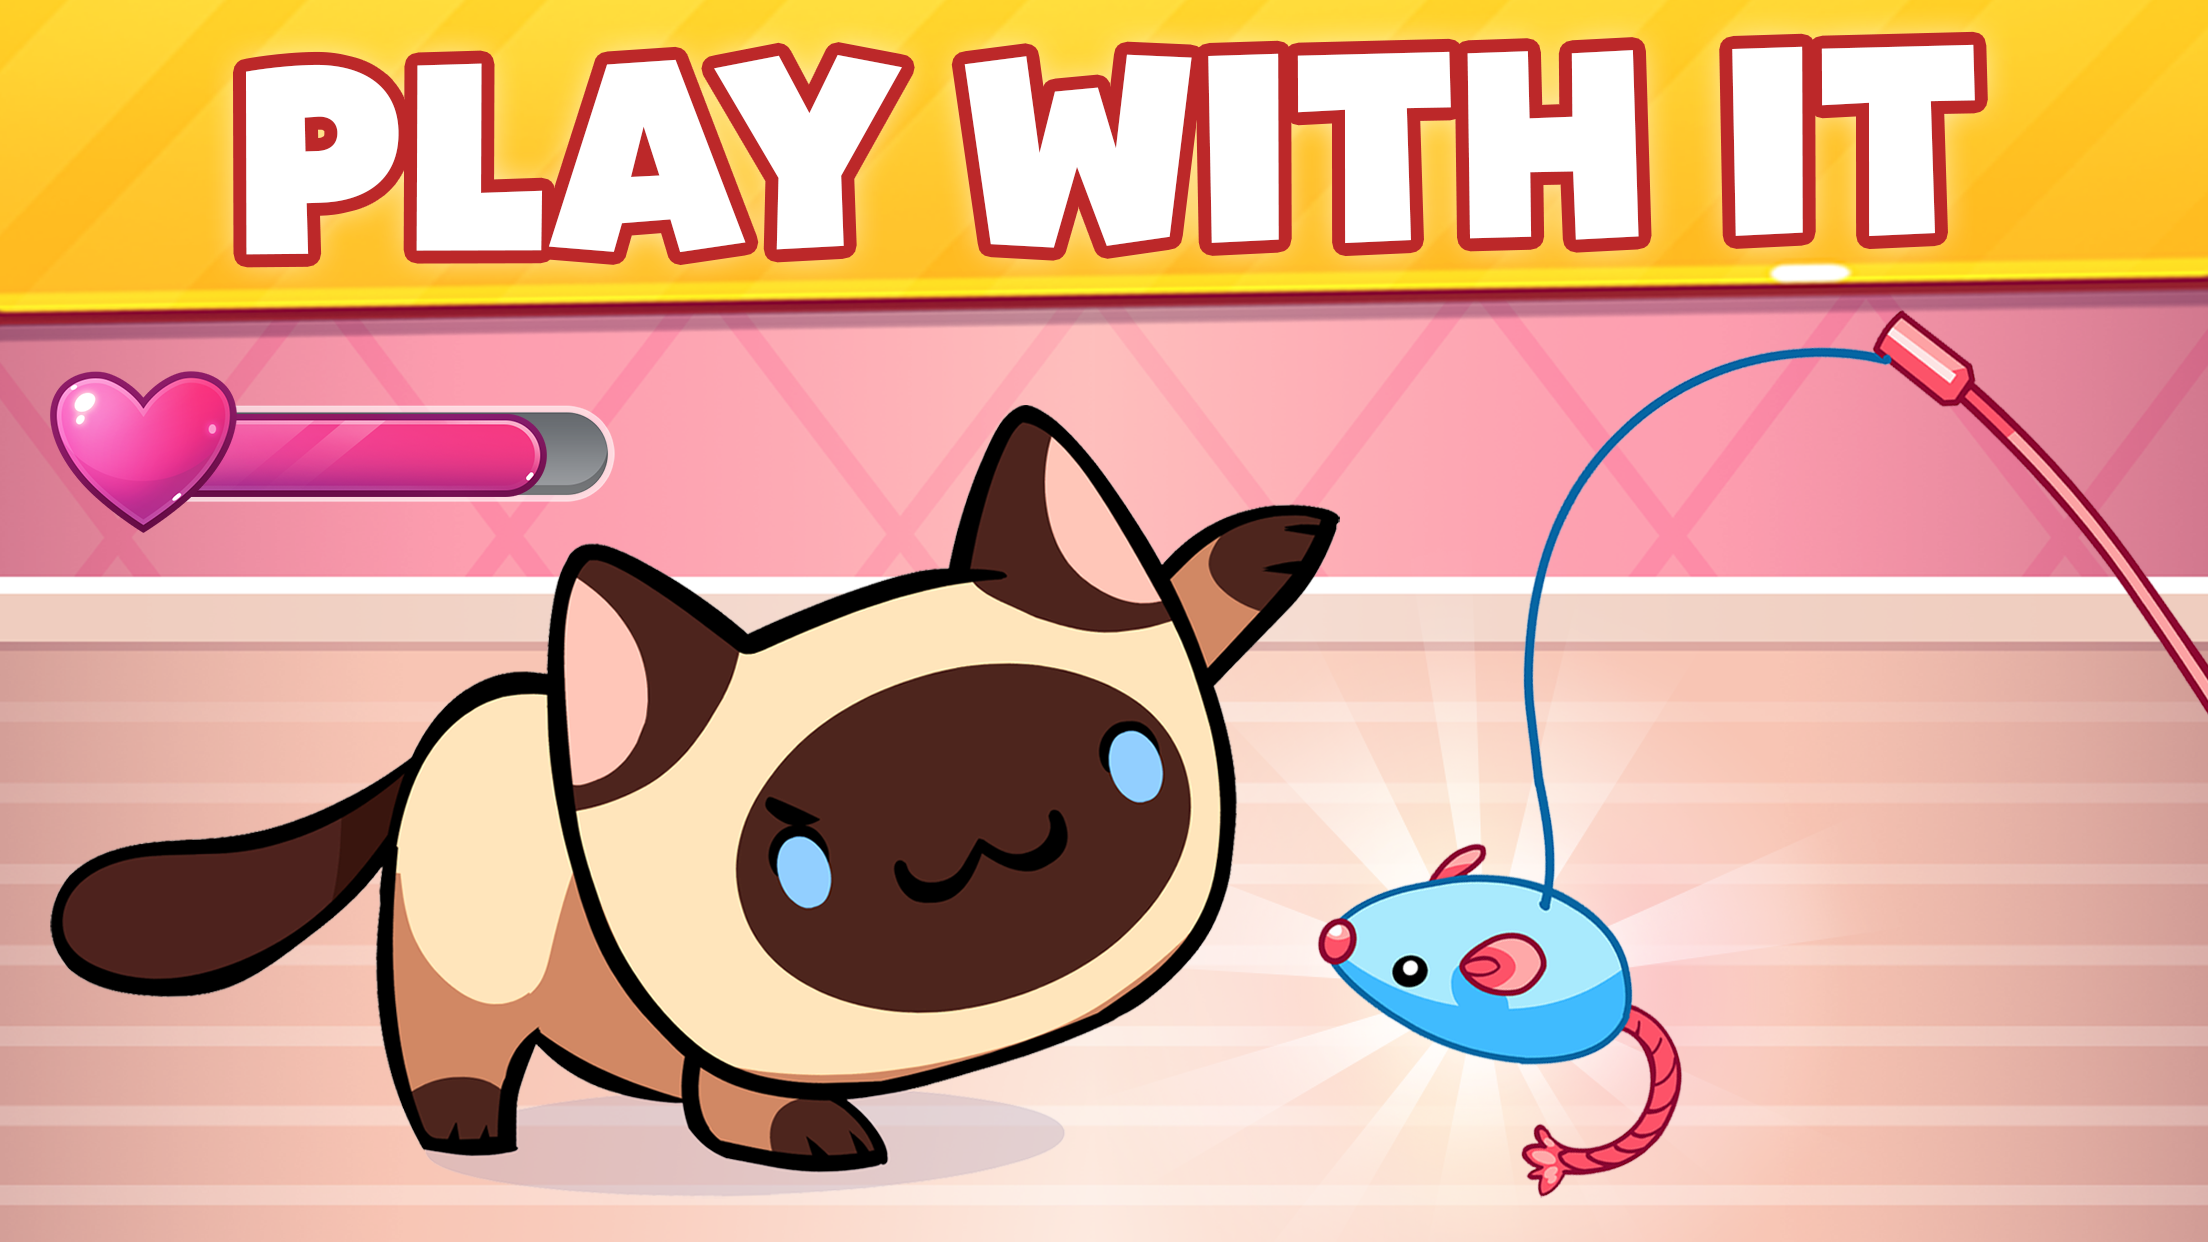 Download & Play Cat Game - The Cats Collector! on PC & Mac (Emulator)